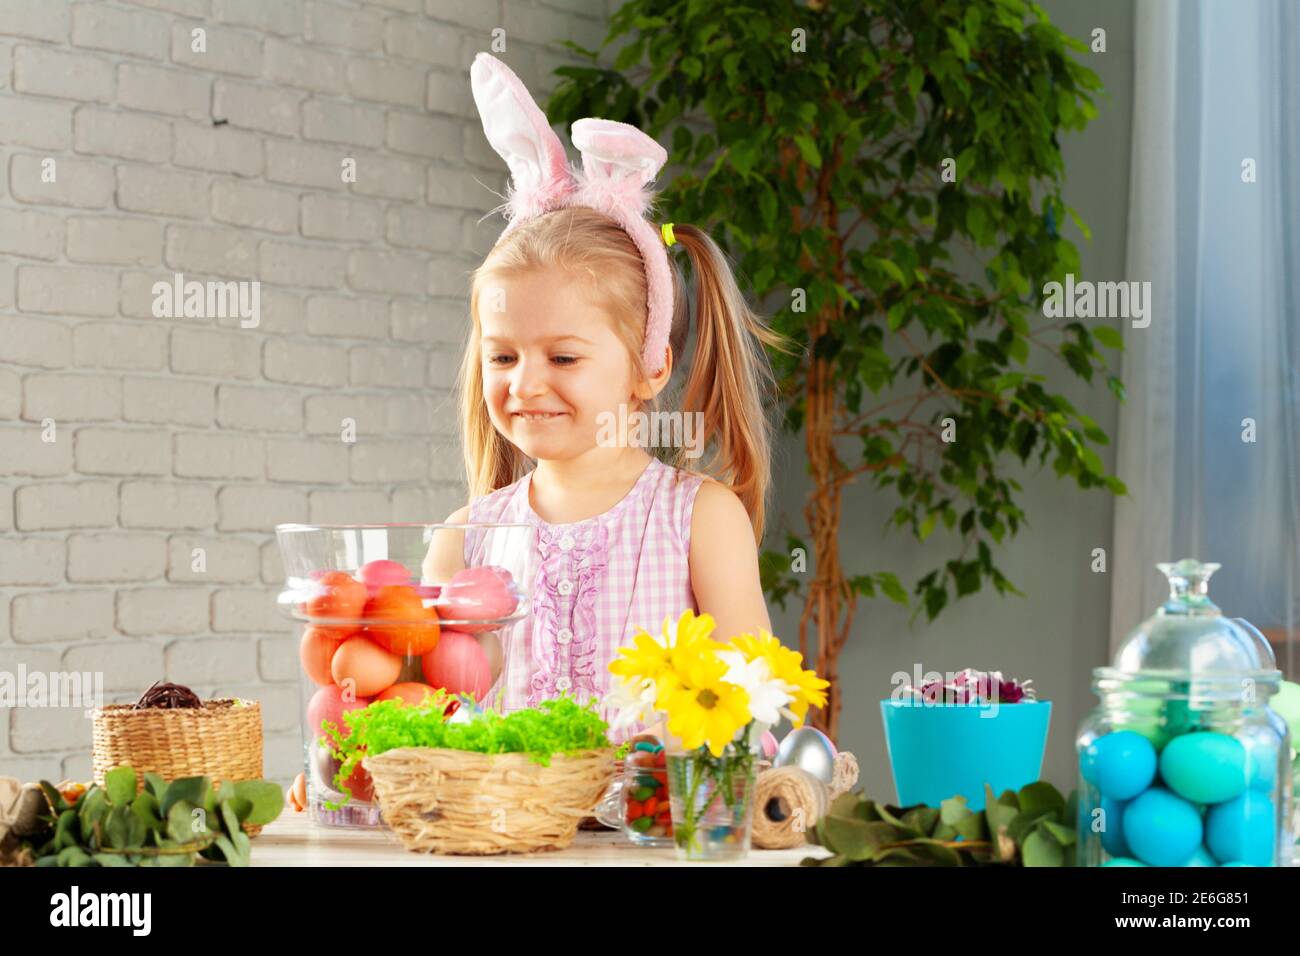 Happy little girl with bunny ears getting ready for Easter party Stock Photo